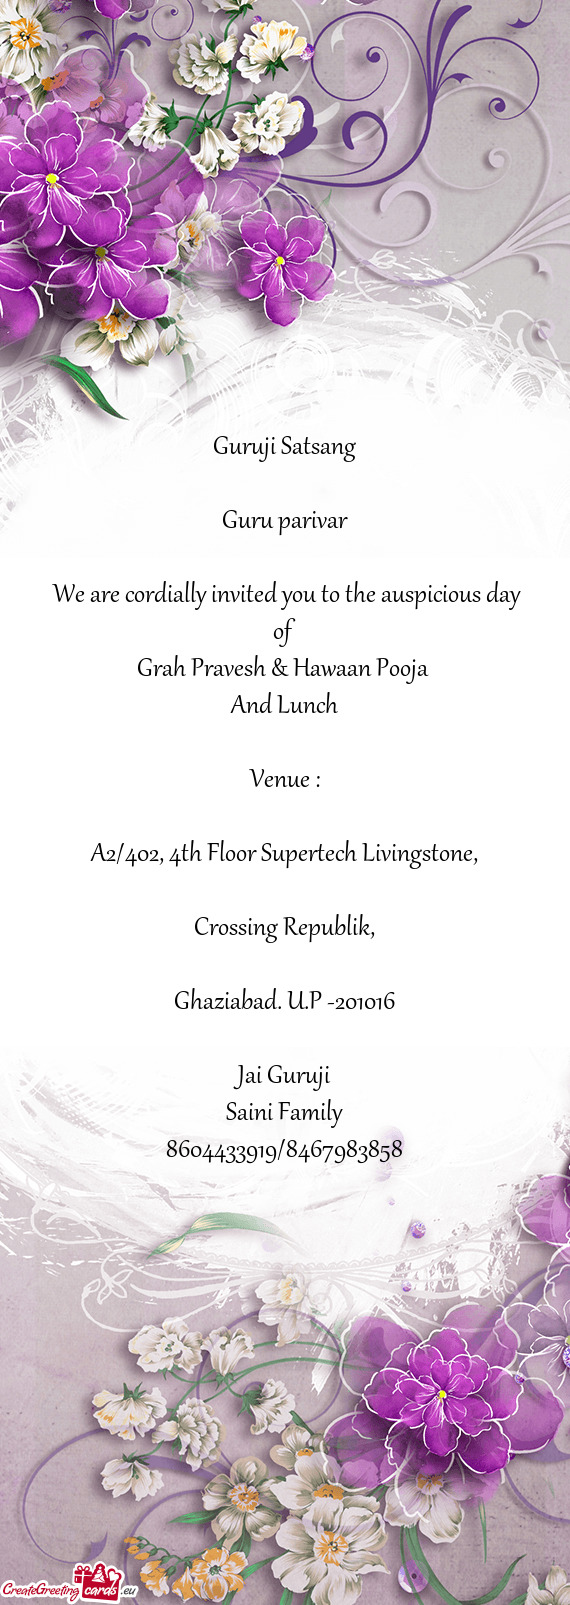 We are cordially invited you to the auspicious day of